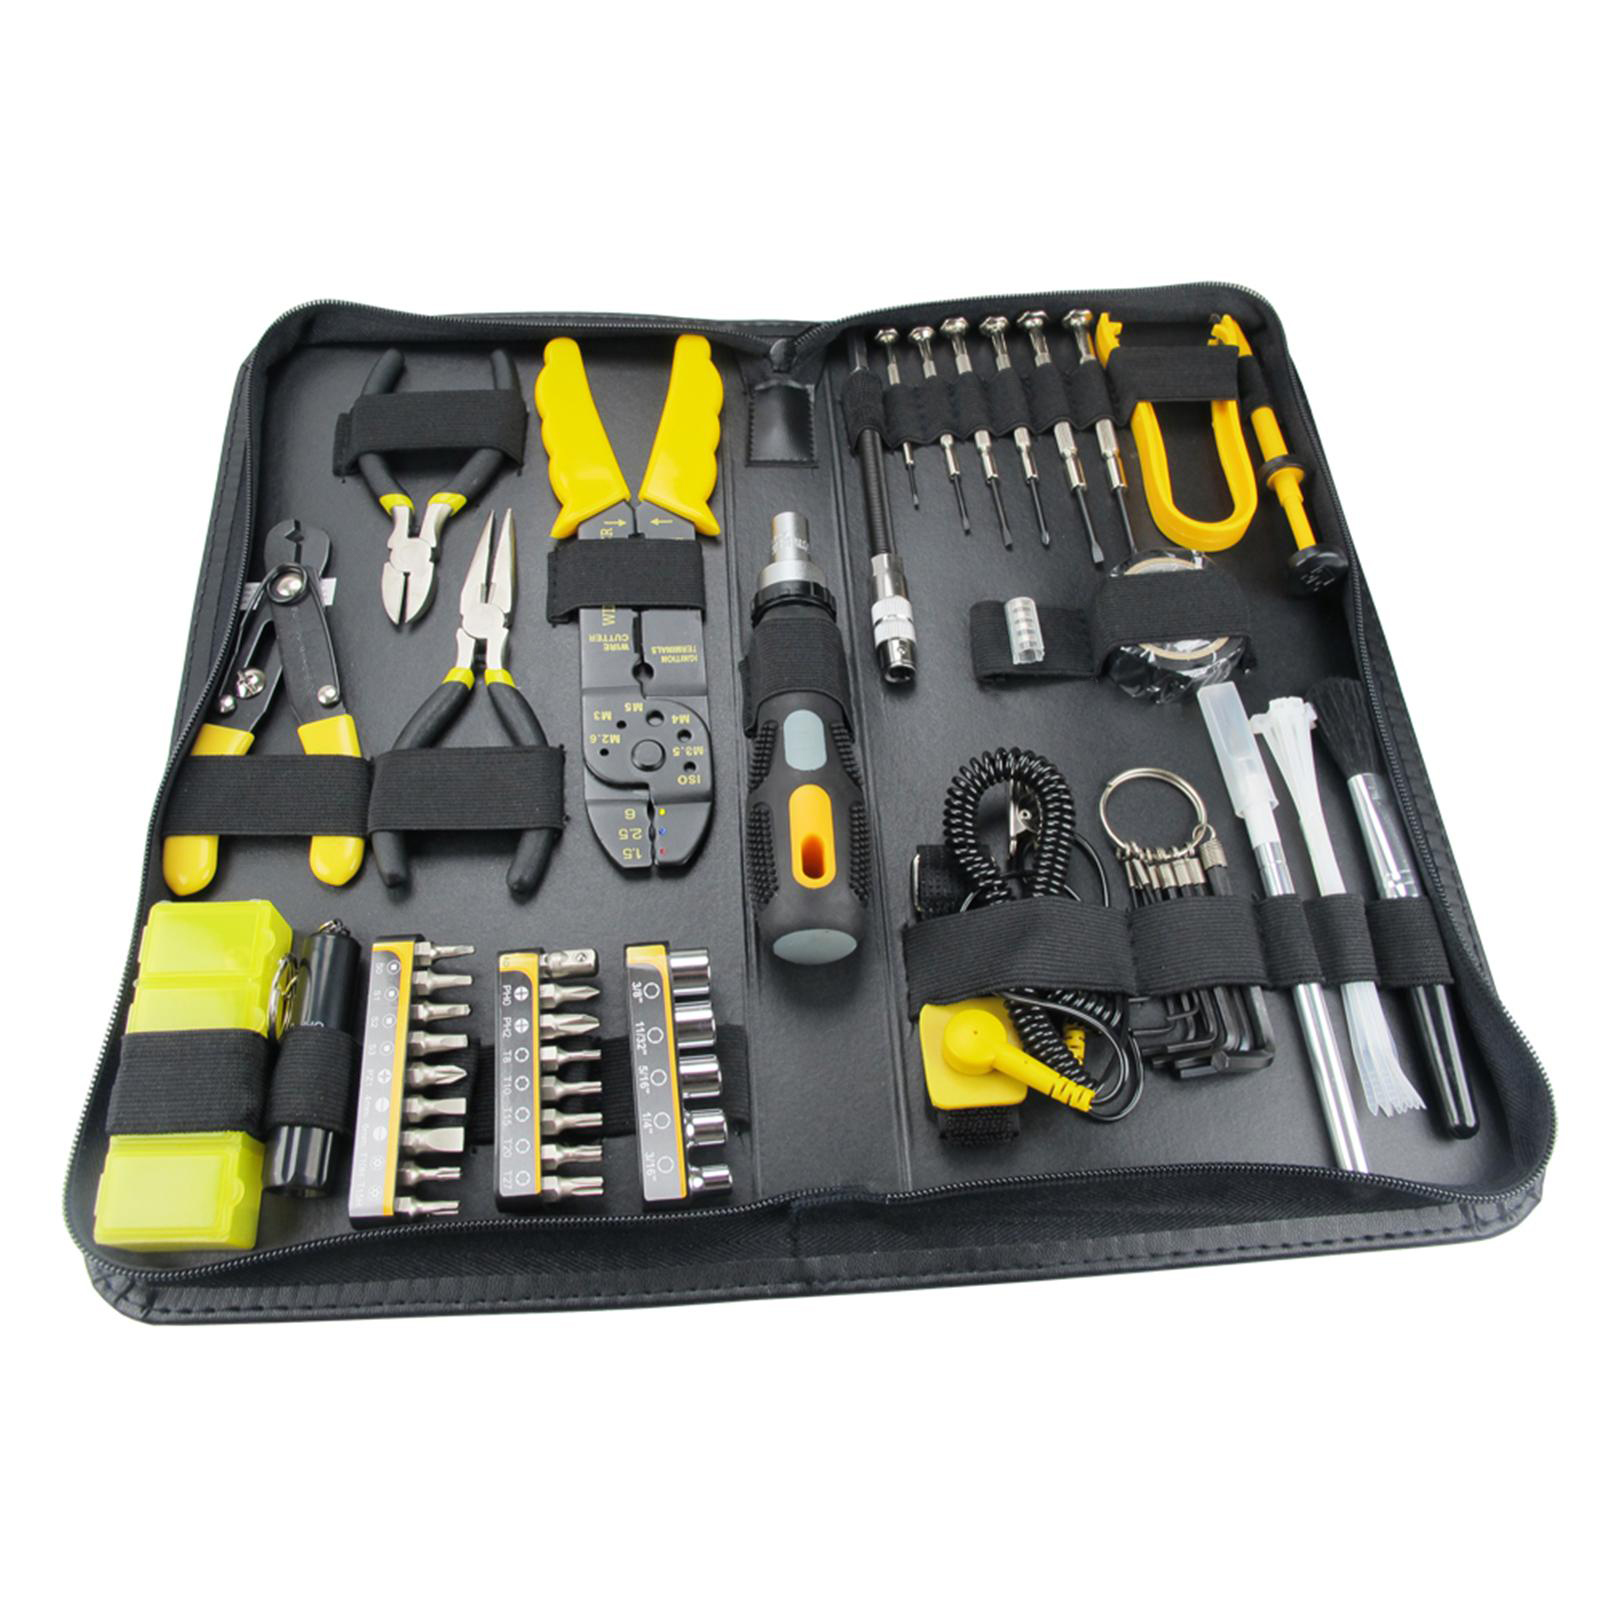 SPROTEK 58 Piece Maintenance / Repair Tool Kit / Computer and PC Tools in Case